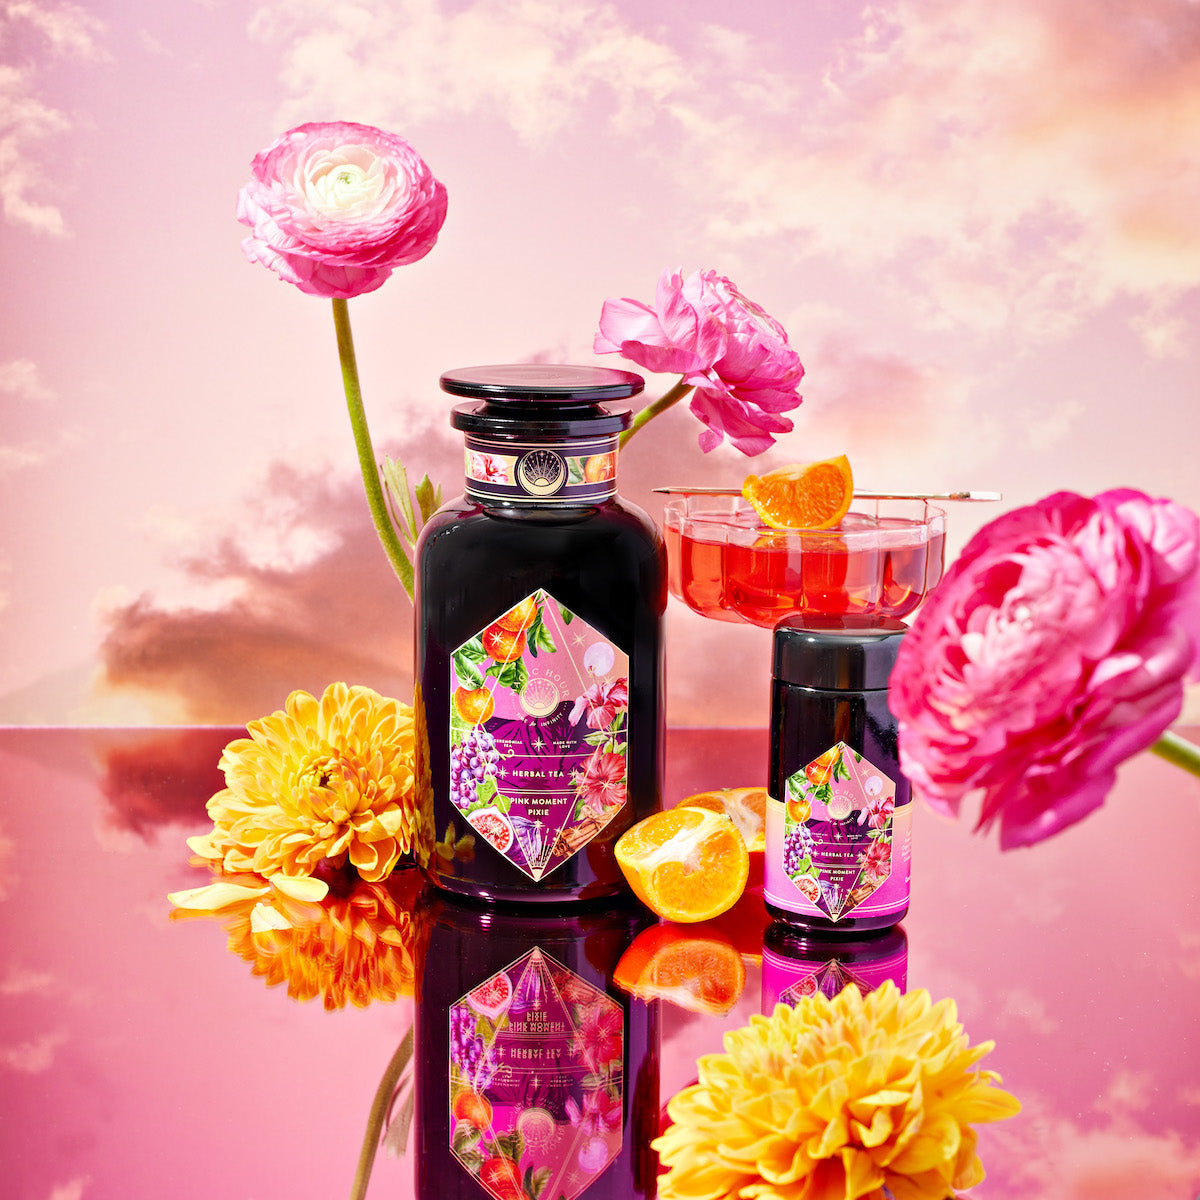 A beautiful dream like image of pink moment pixie tea in a jar with a pink sunset in the background.